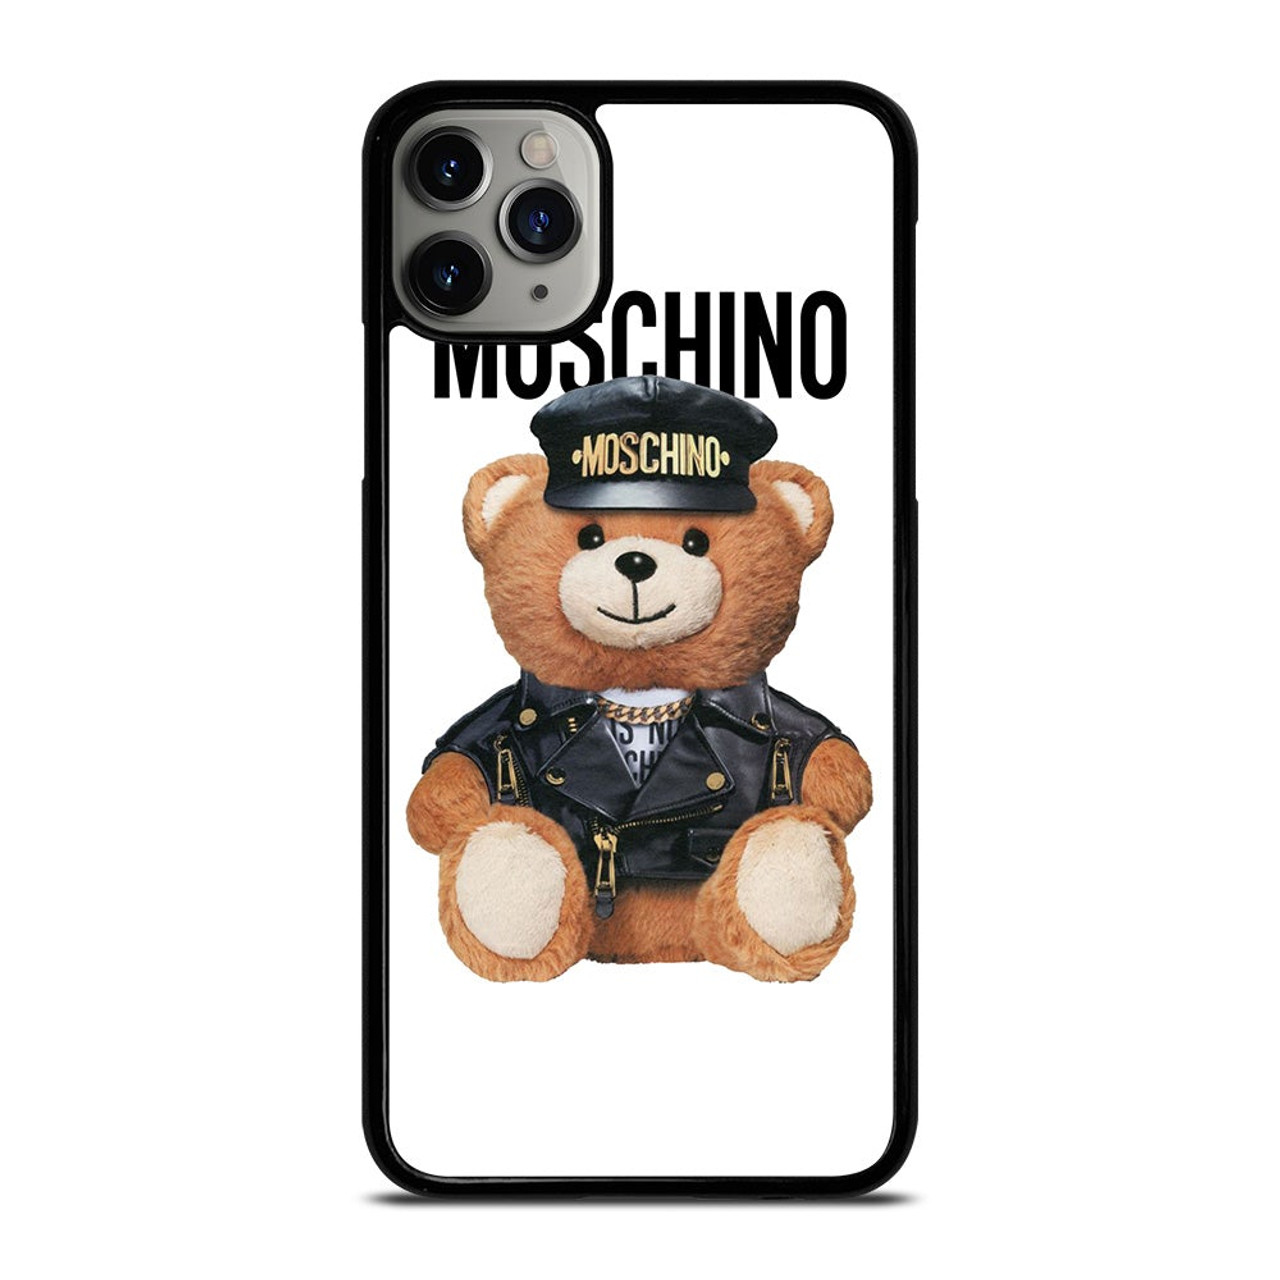 MOSCHINO TEDDY BEAR COOL iPhone 11 Pro Max Case Cover